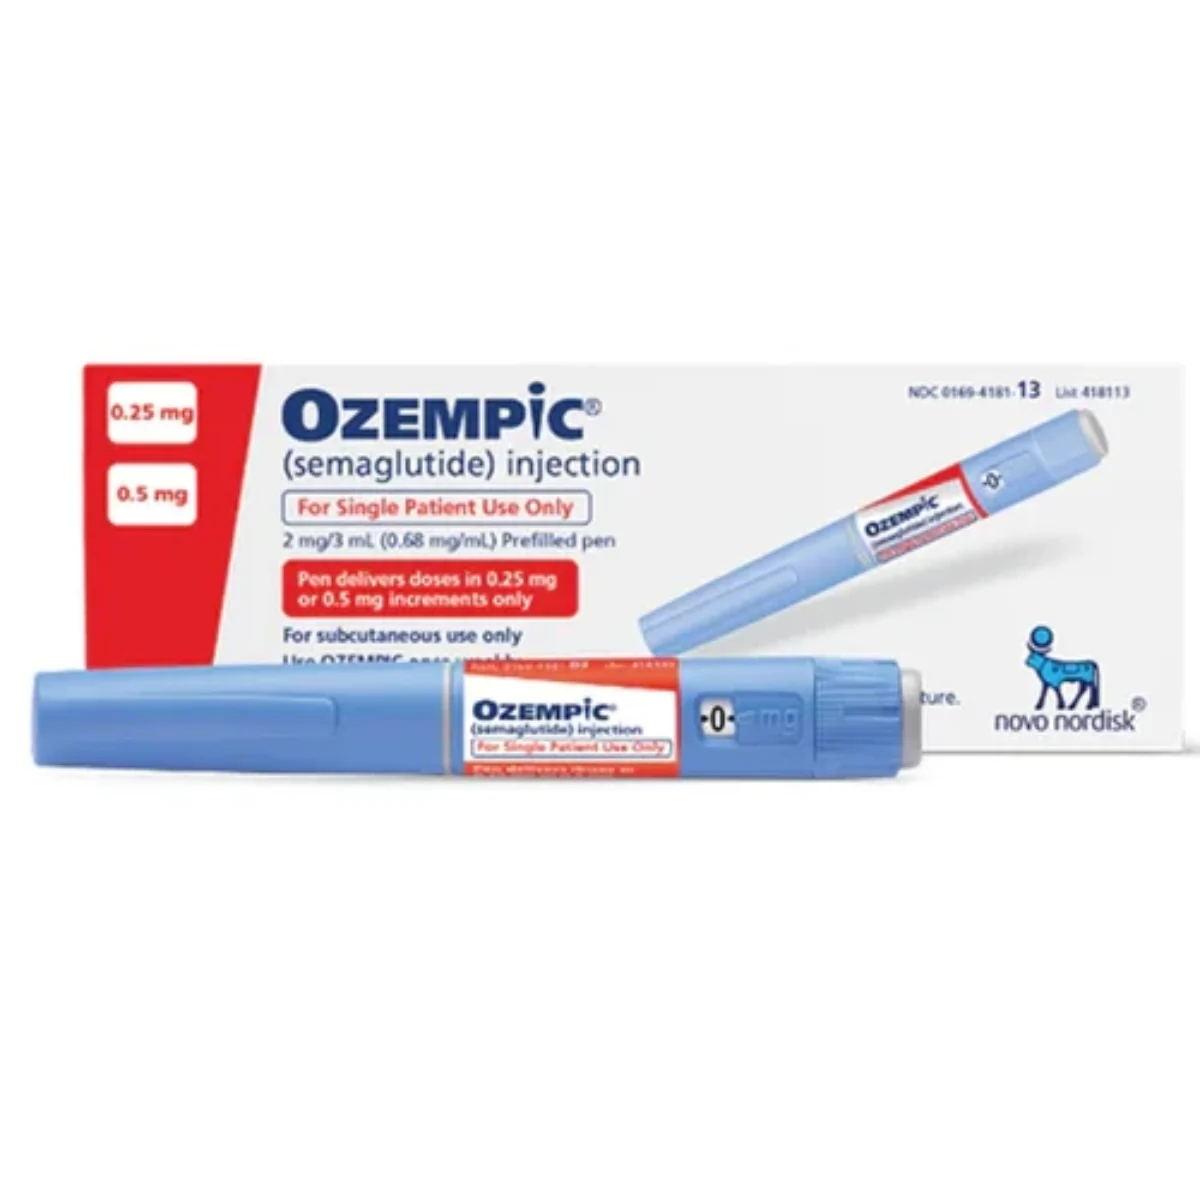 How to use your OZEMPIC pen 